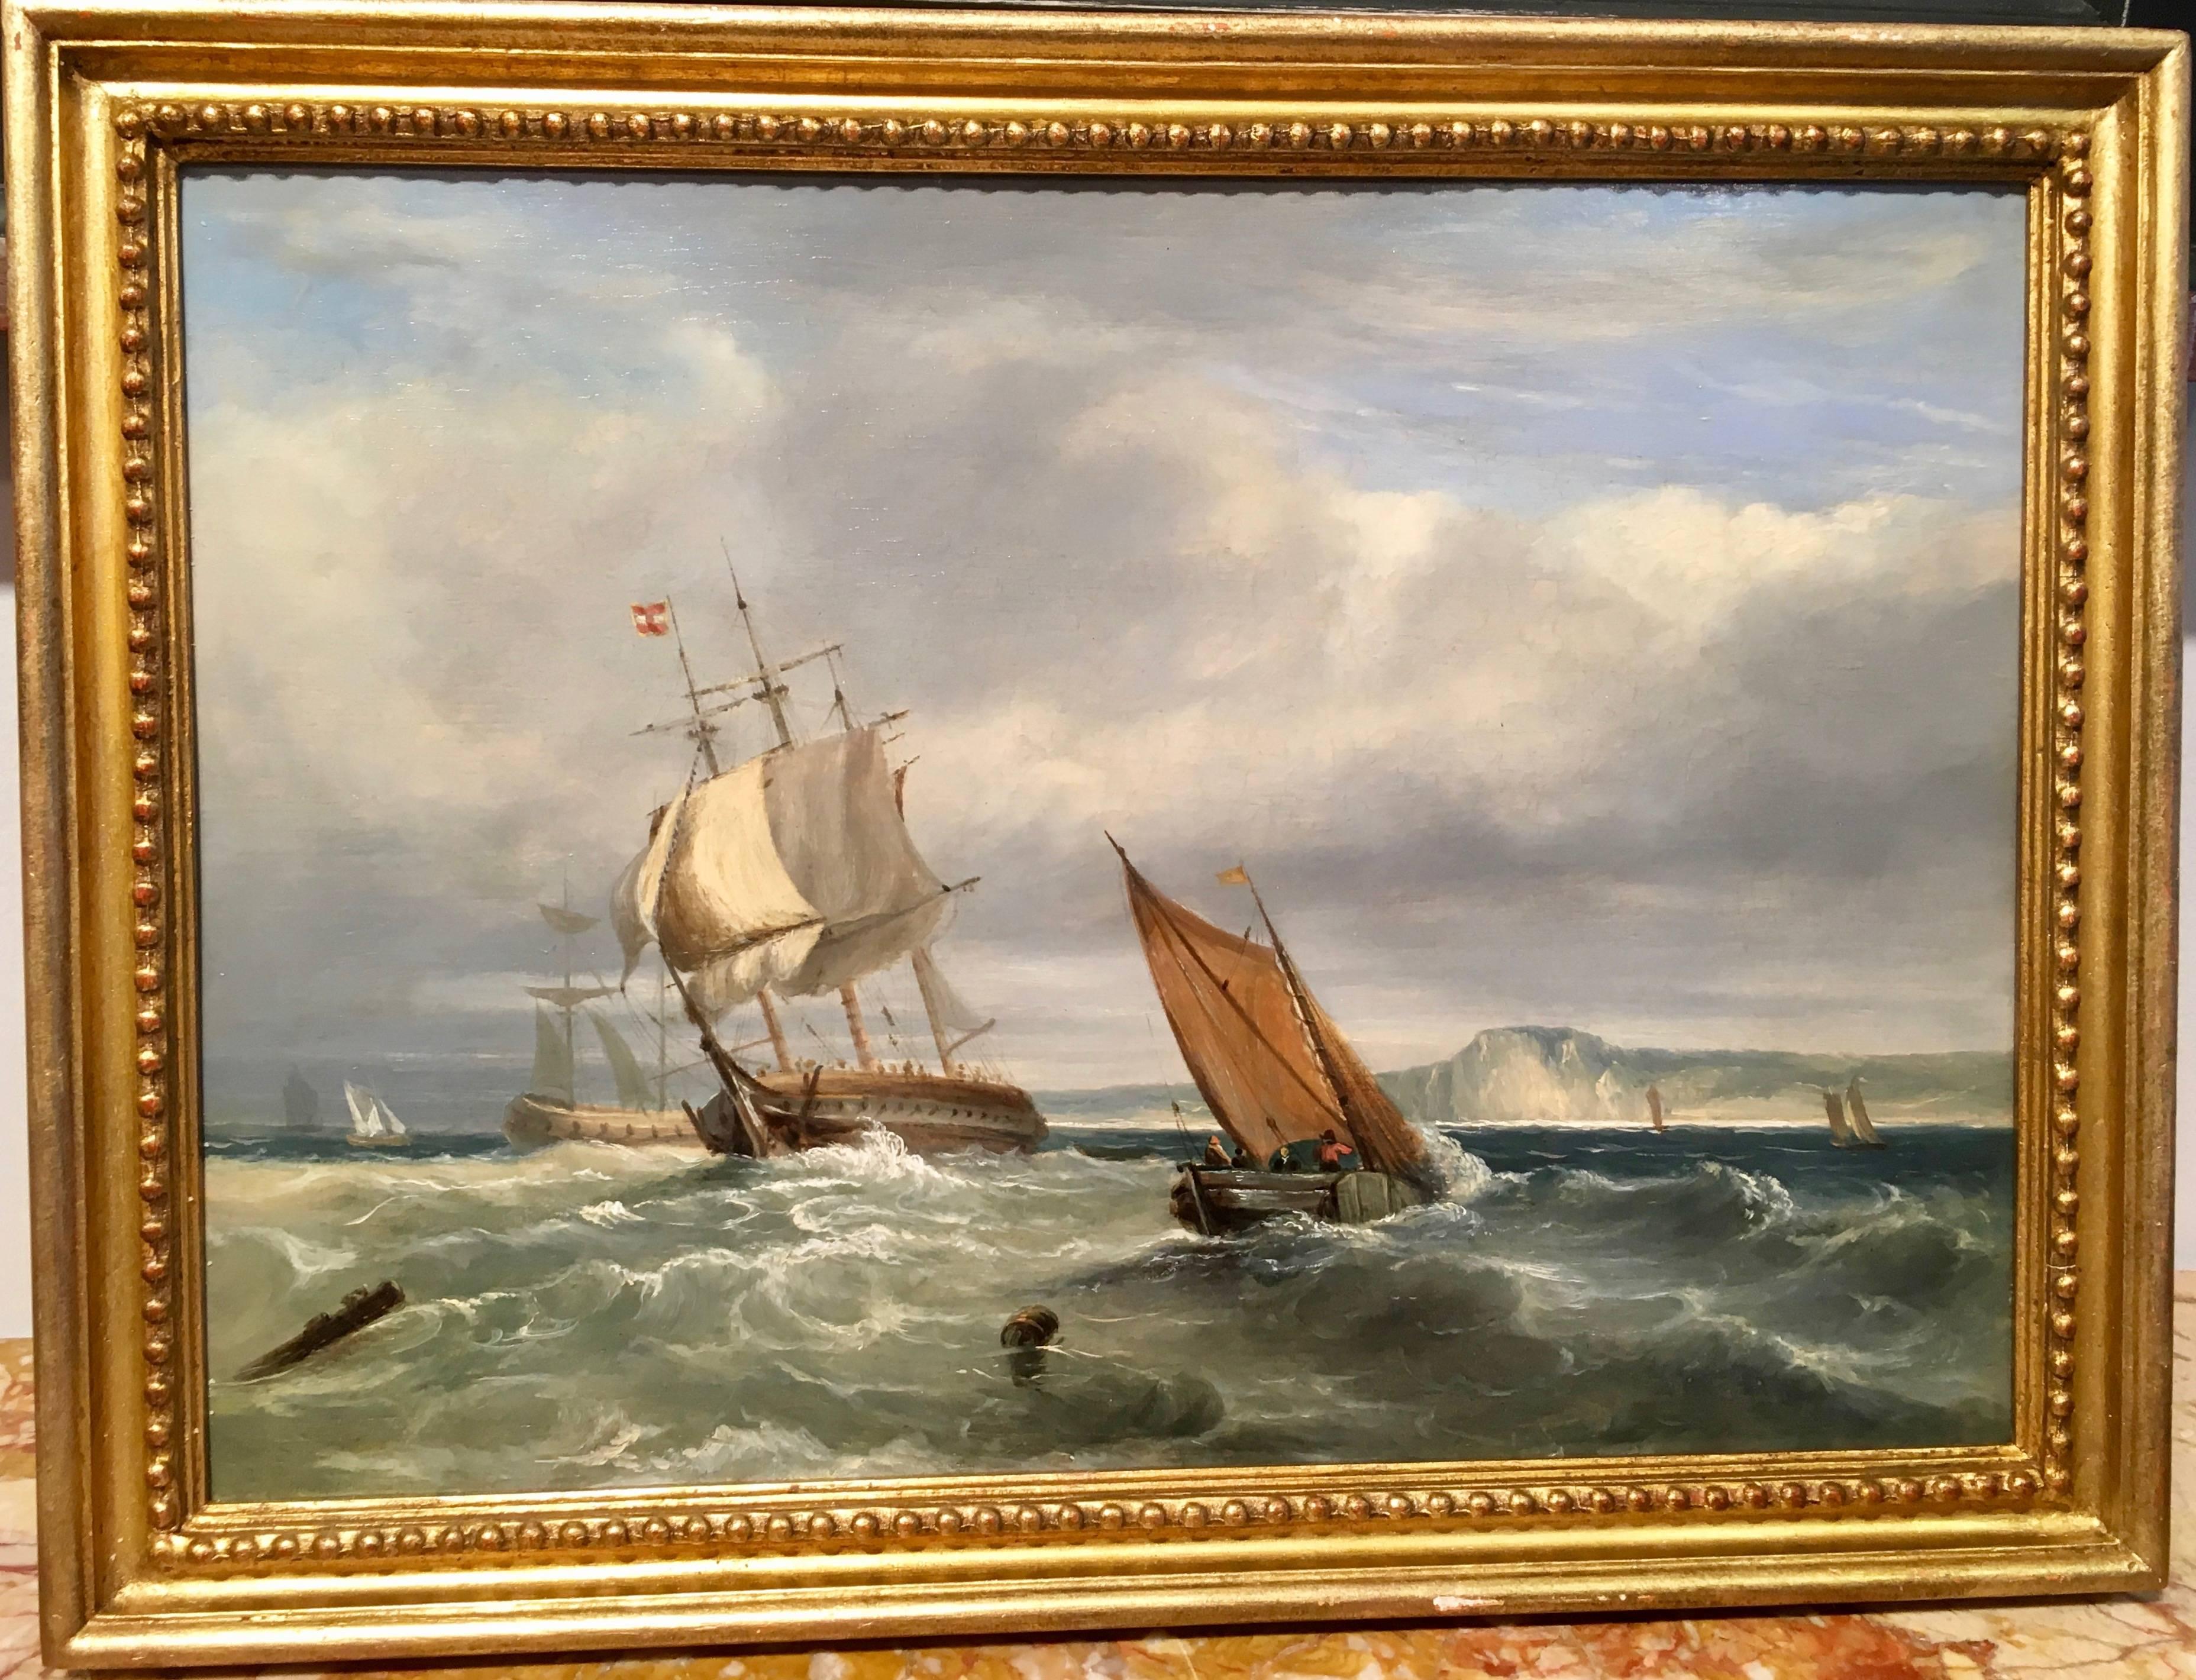 John 'Jock' Wilson Landscape Painting - Scottish marine scene with Battle ships and fishing vessels in a rough sea